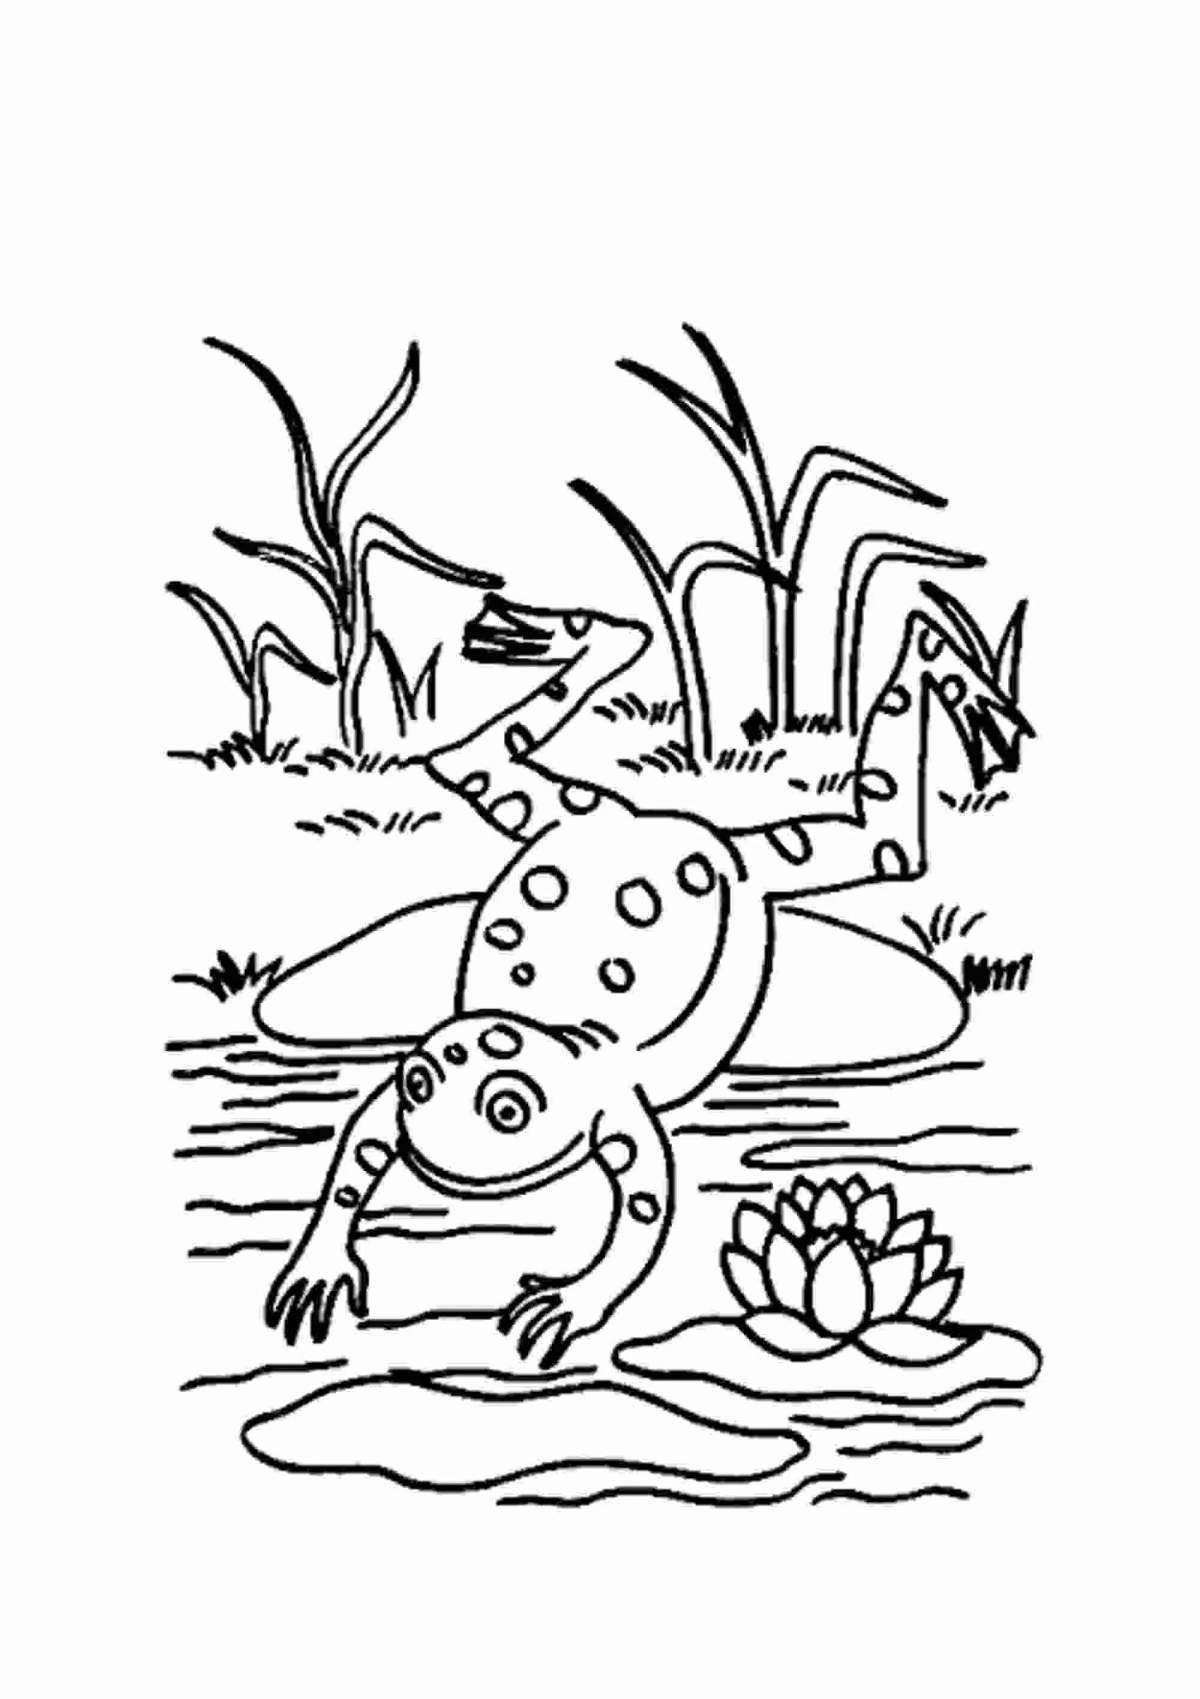 Funny travel frog coloring pages for kids